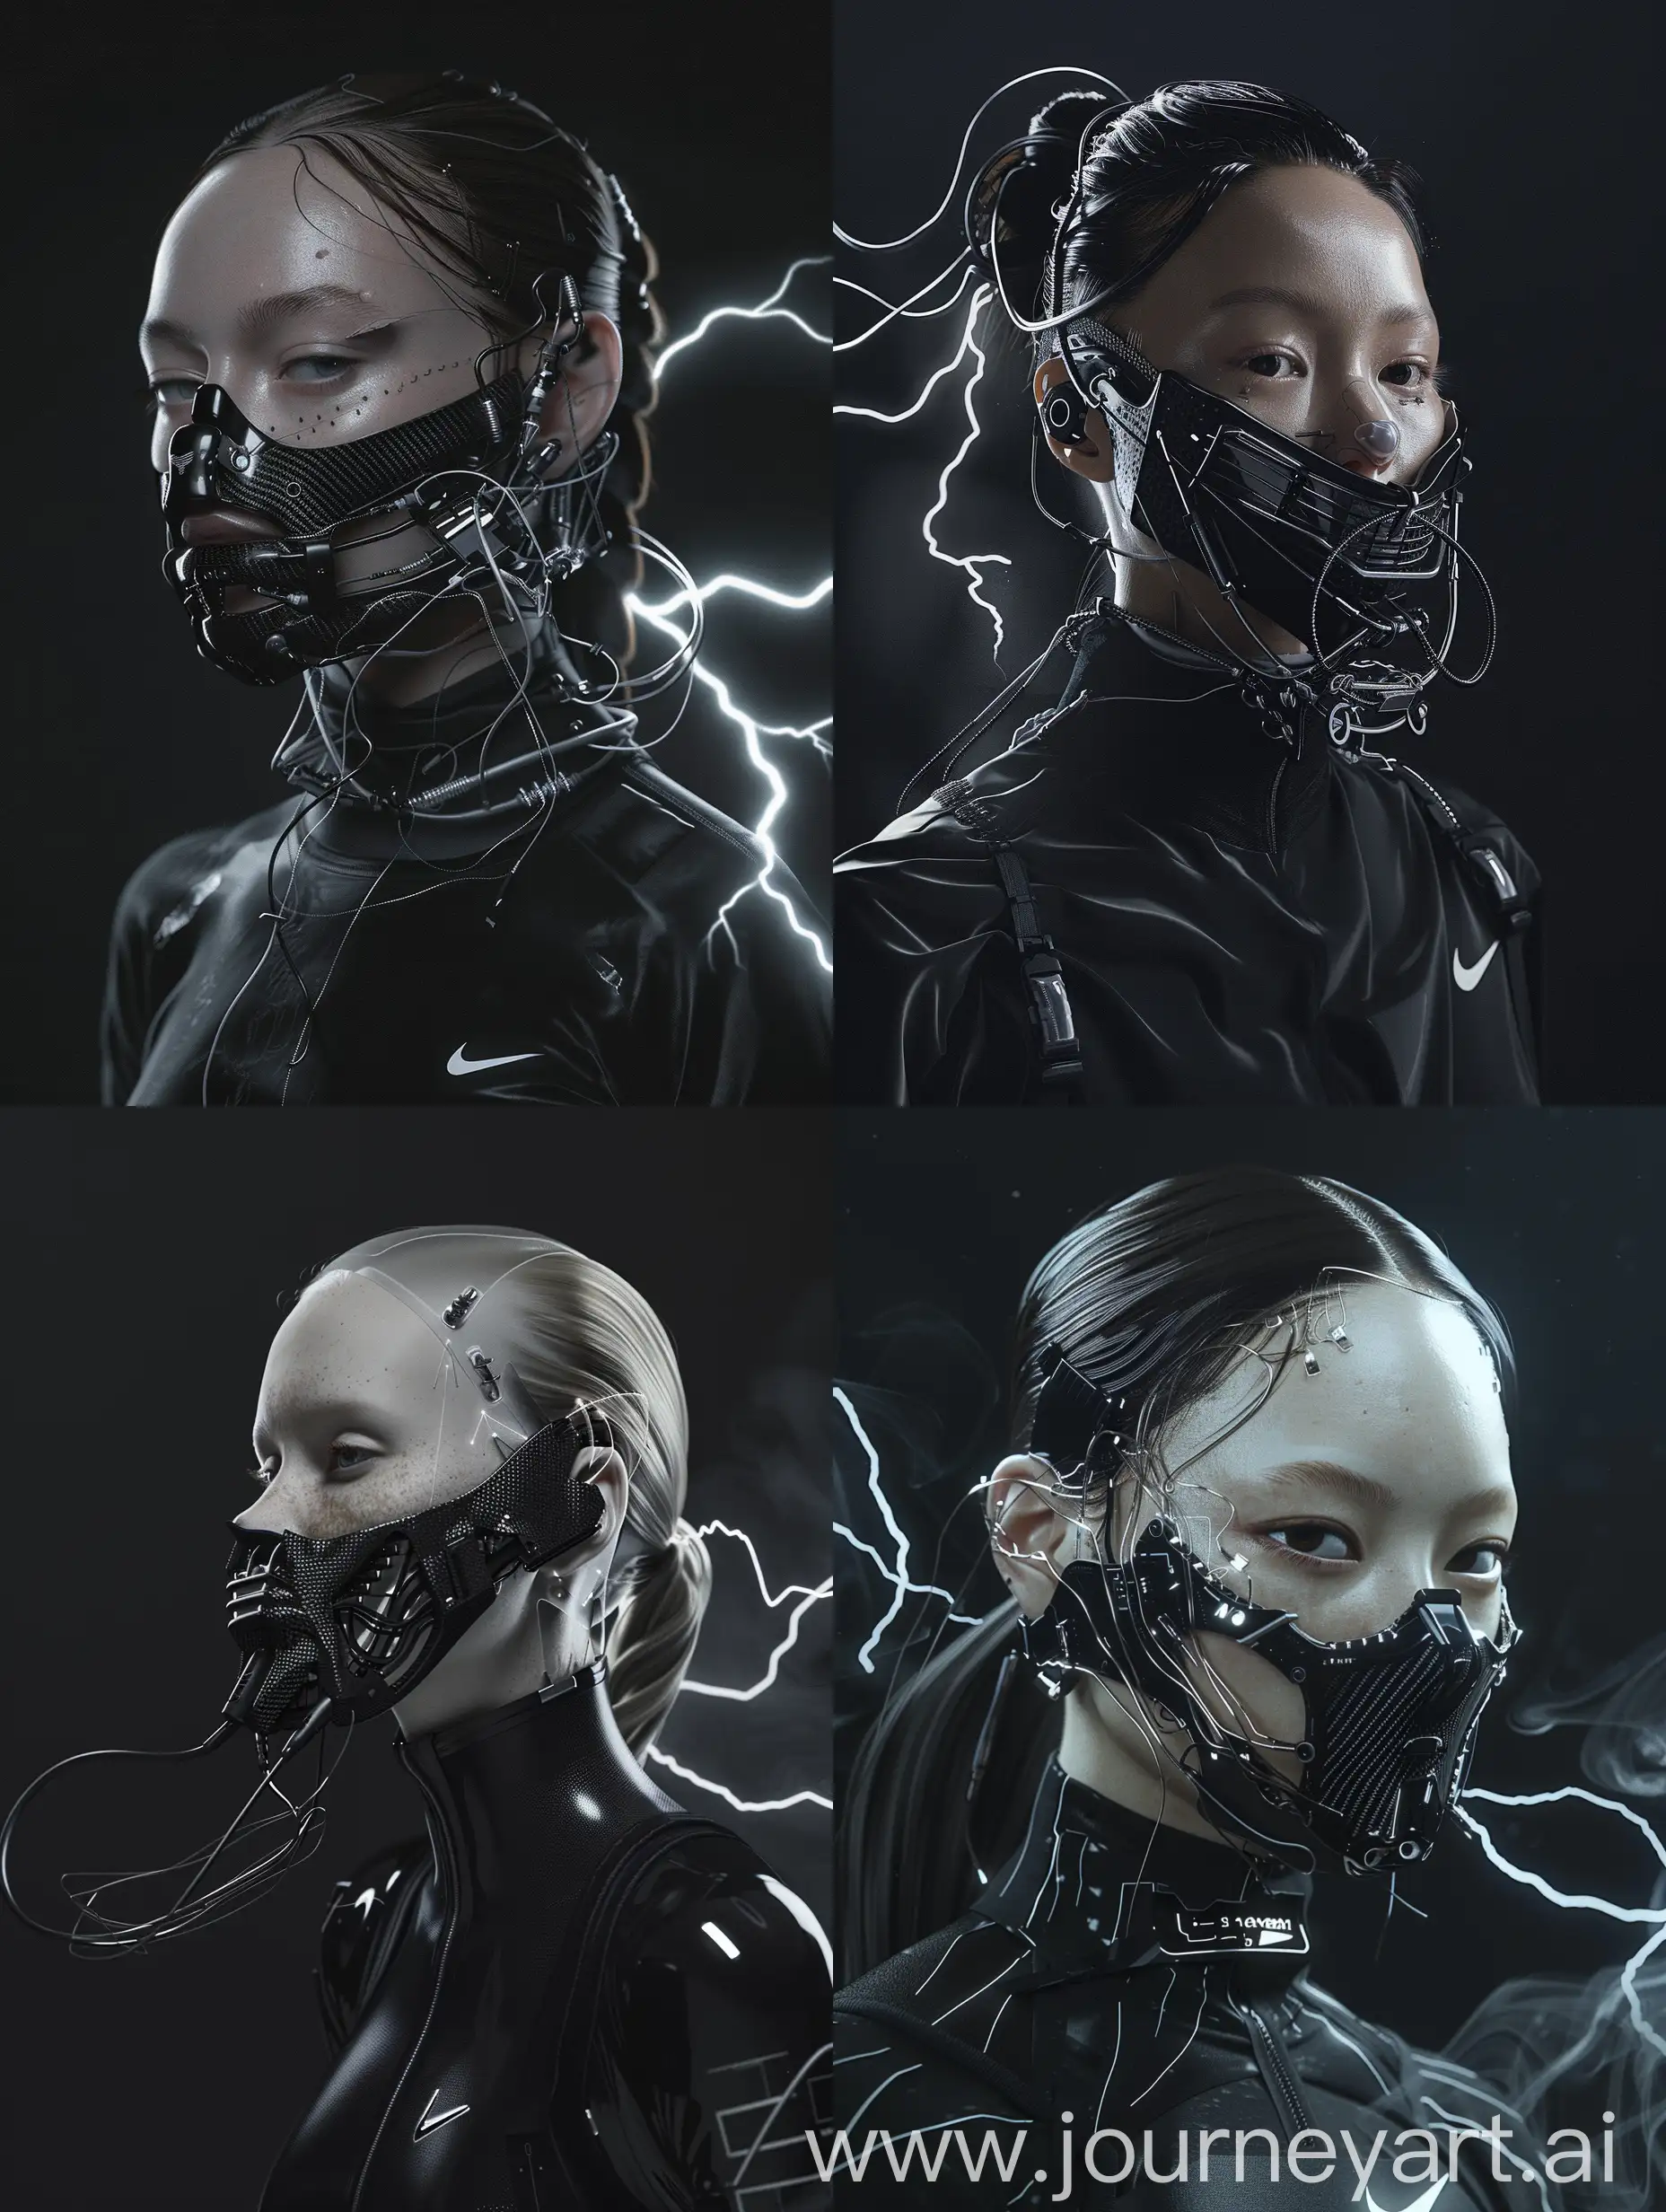 Against a sleek black backdrop, behold a mesmerizing character adorned with a cybernetic mouth-covering mask. It seamlessly blends cutting-edge technology with intricate details, boasting carbon fiber textures, sleek aluminum accents, and wires. Symbolizing the delicate balance between humanity and machine, her appearance embodies the essence of a futuristic cyberpunk aesthetic, enhanced with Nike-inspired add-ons. With dynamic movements reminiscent of action film sequences, cinematic haze, and energy that crackles like lightning, her presence captivates with its irresistible allure